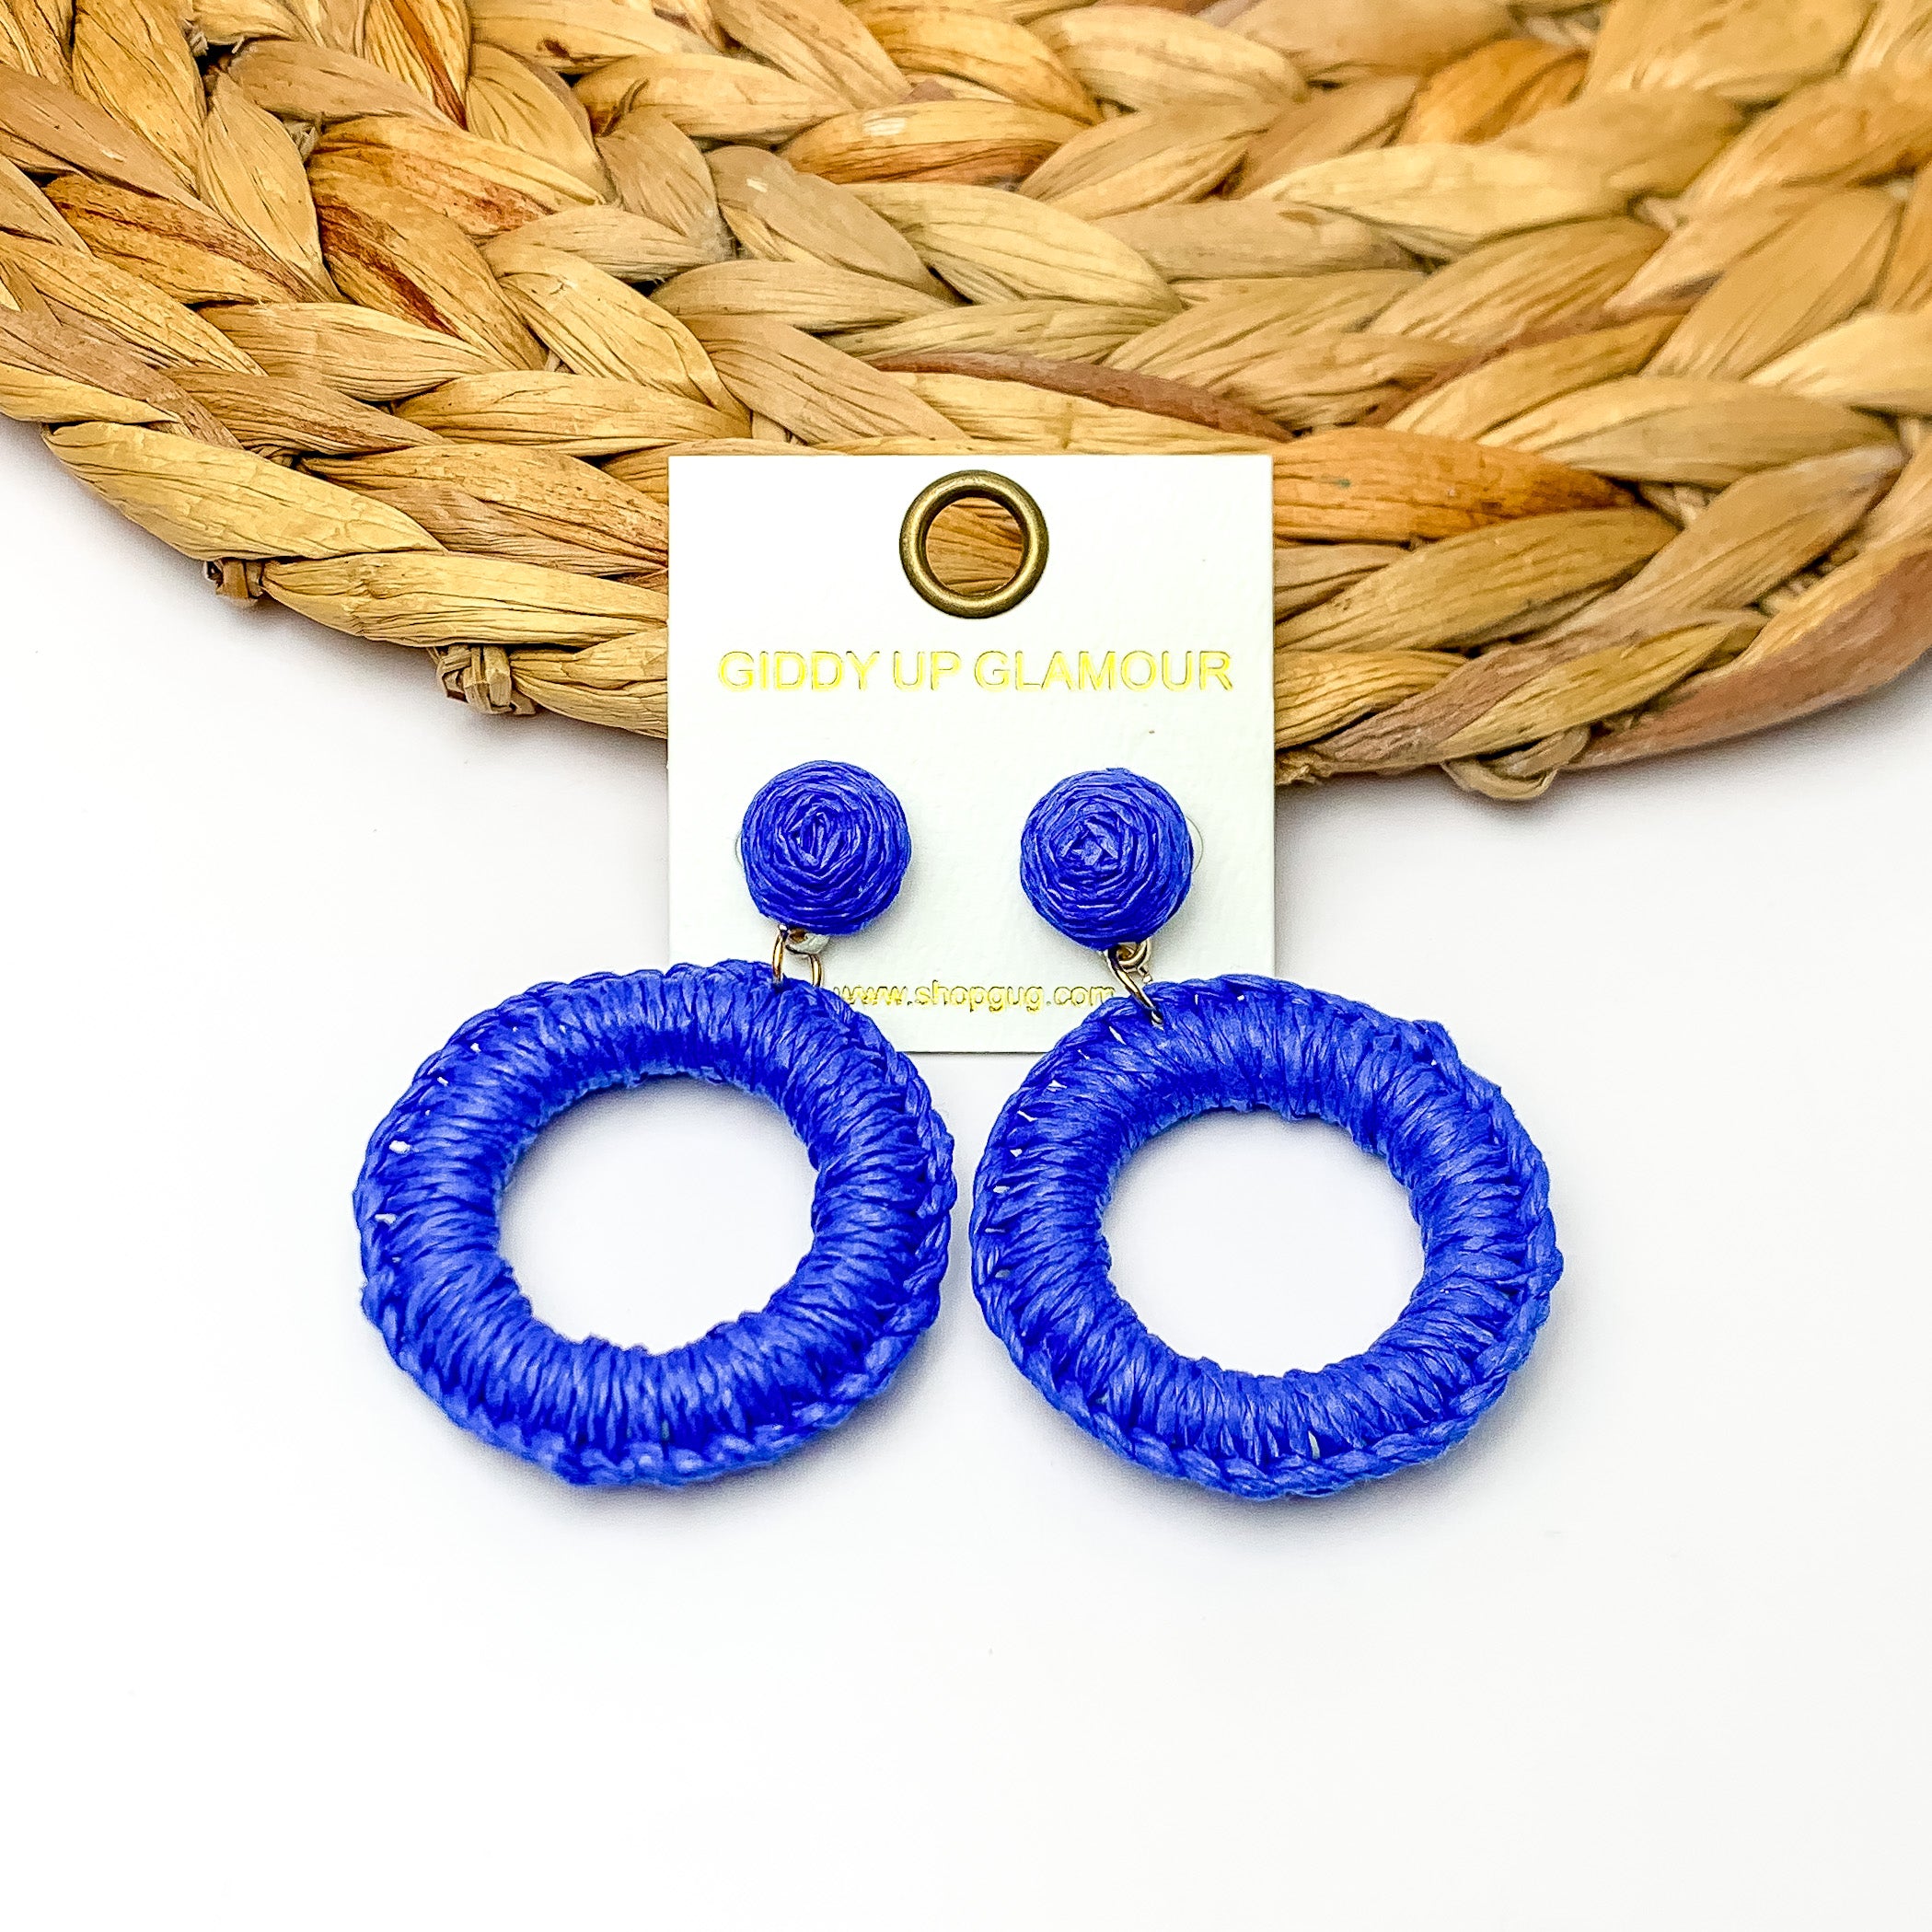 Beachside Café Raffia Wrapped Circle Earrings in Royal Blue. Pictured on a white background with the top of the earrings laying on a brown circle decorative piece. 